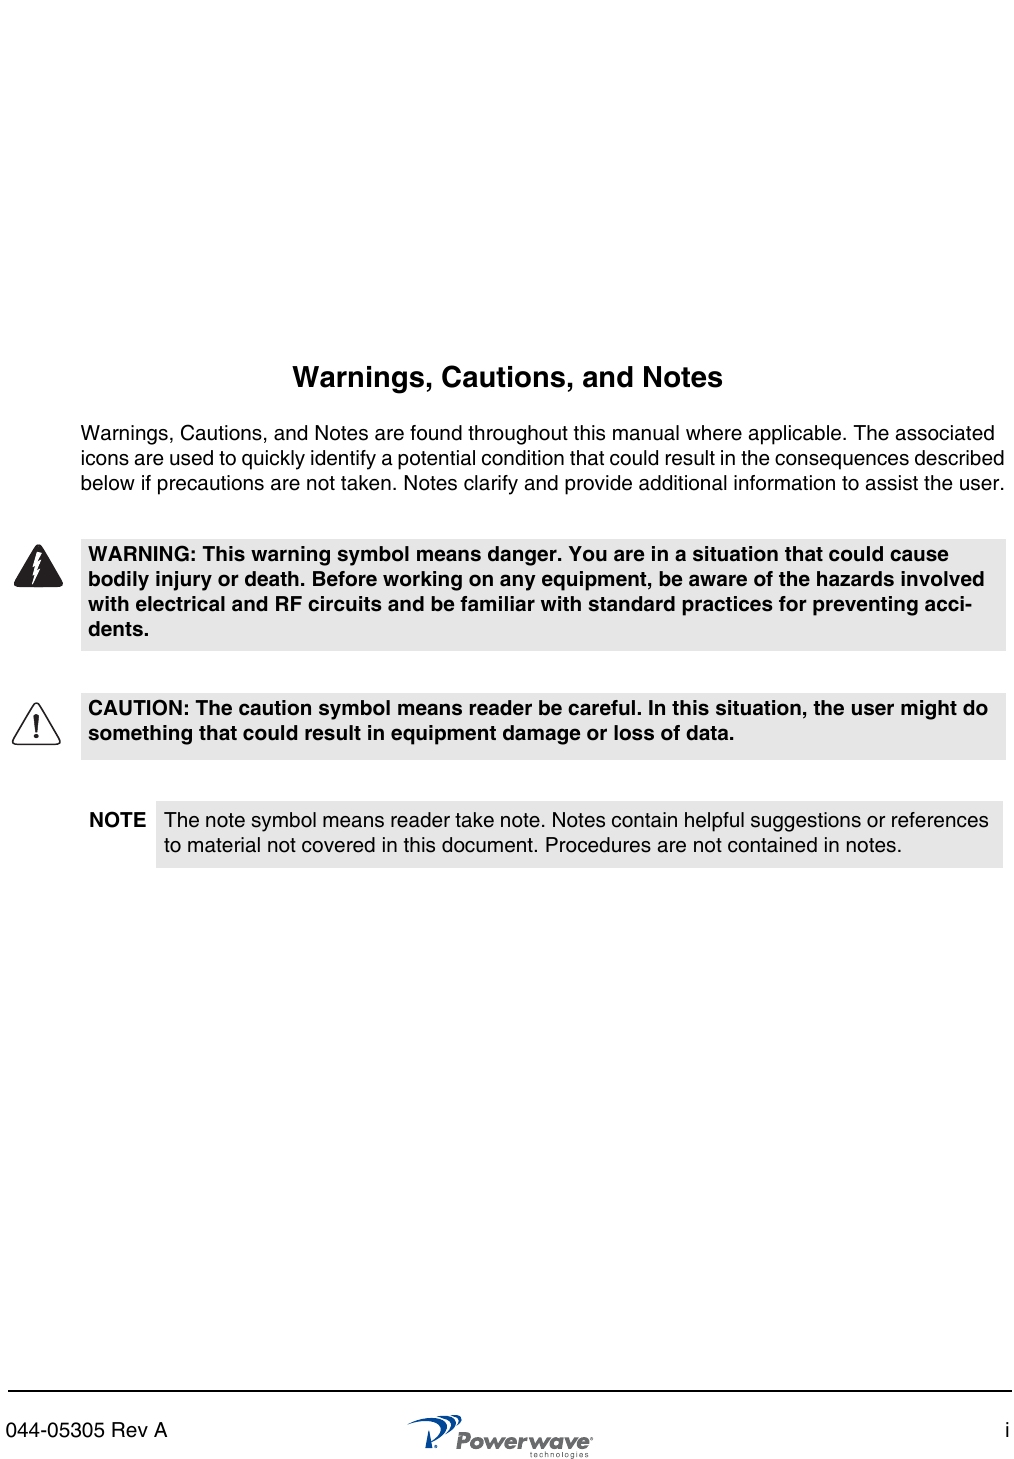 044-05305 Rev A iWarnings, Cautions, and NotesWarnings, Cautions, and Notes are found throughout this manual where applicable. The associated icons are used to quickly identify a potential condition that could result in the consequences described below if precautions are not taken. Notes clarify and provide additional information to assist the user.WARNING: This warning symbol means danger. You are in a situation that could cause bodily injury or death. Before working on any equipment, be aware of the hazards involved with electrical and RF circuits and be familiar with standard practices for preventing acci-dents.CAUTION: The caution symbol means reader be careful. In this situation, the user might do something that could result in equipment damage or loss of data. NOTE The note symbol means reader take note. Notes contain helpful suggestions or references to material not covered in this document. Procedures are not contained in notes. 